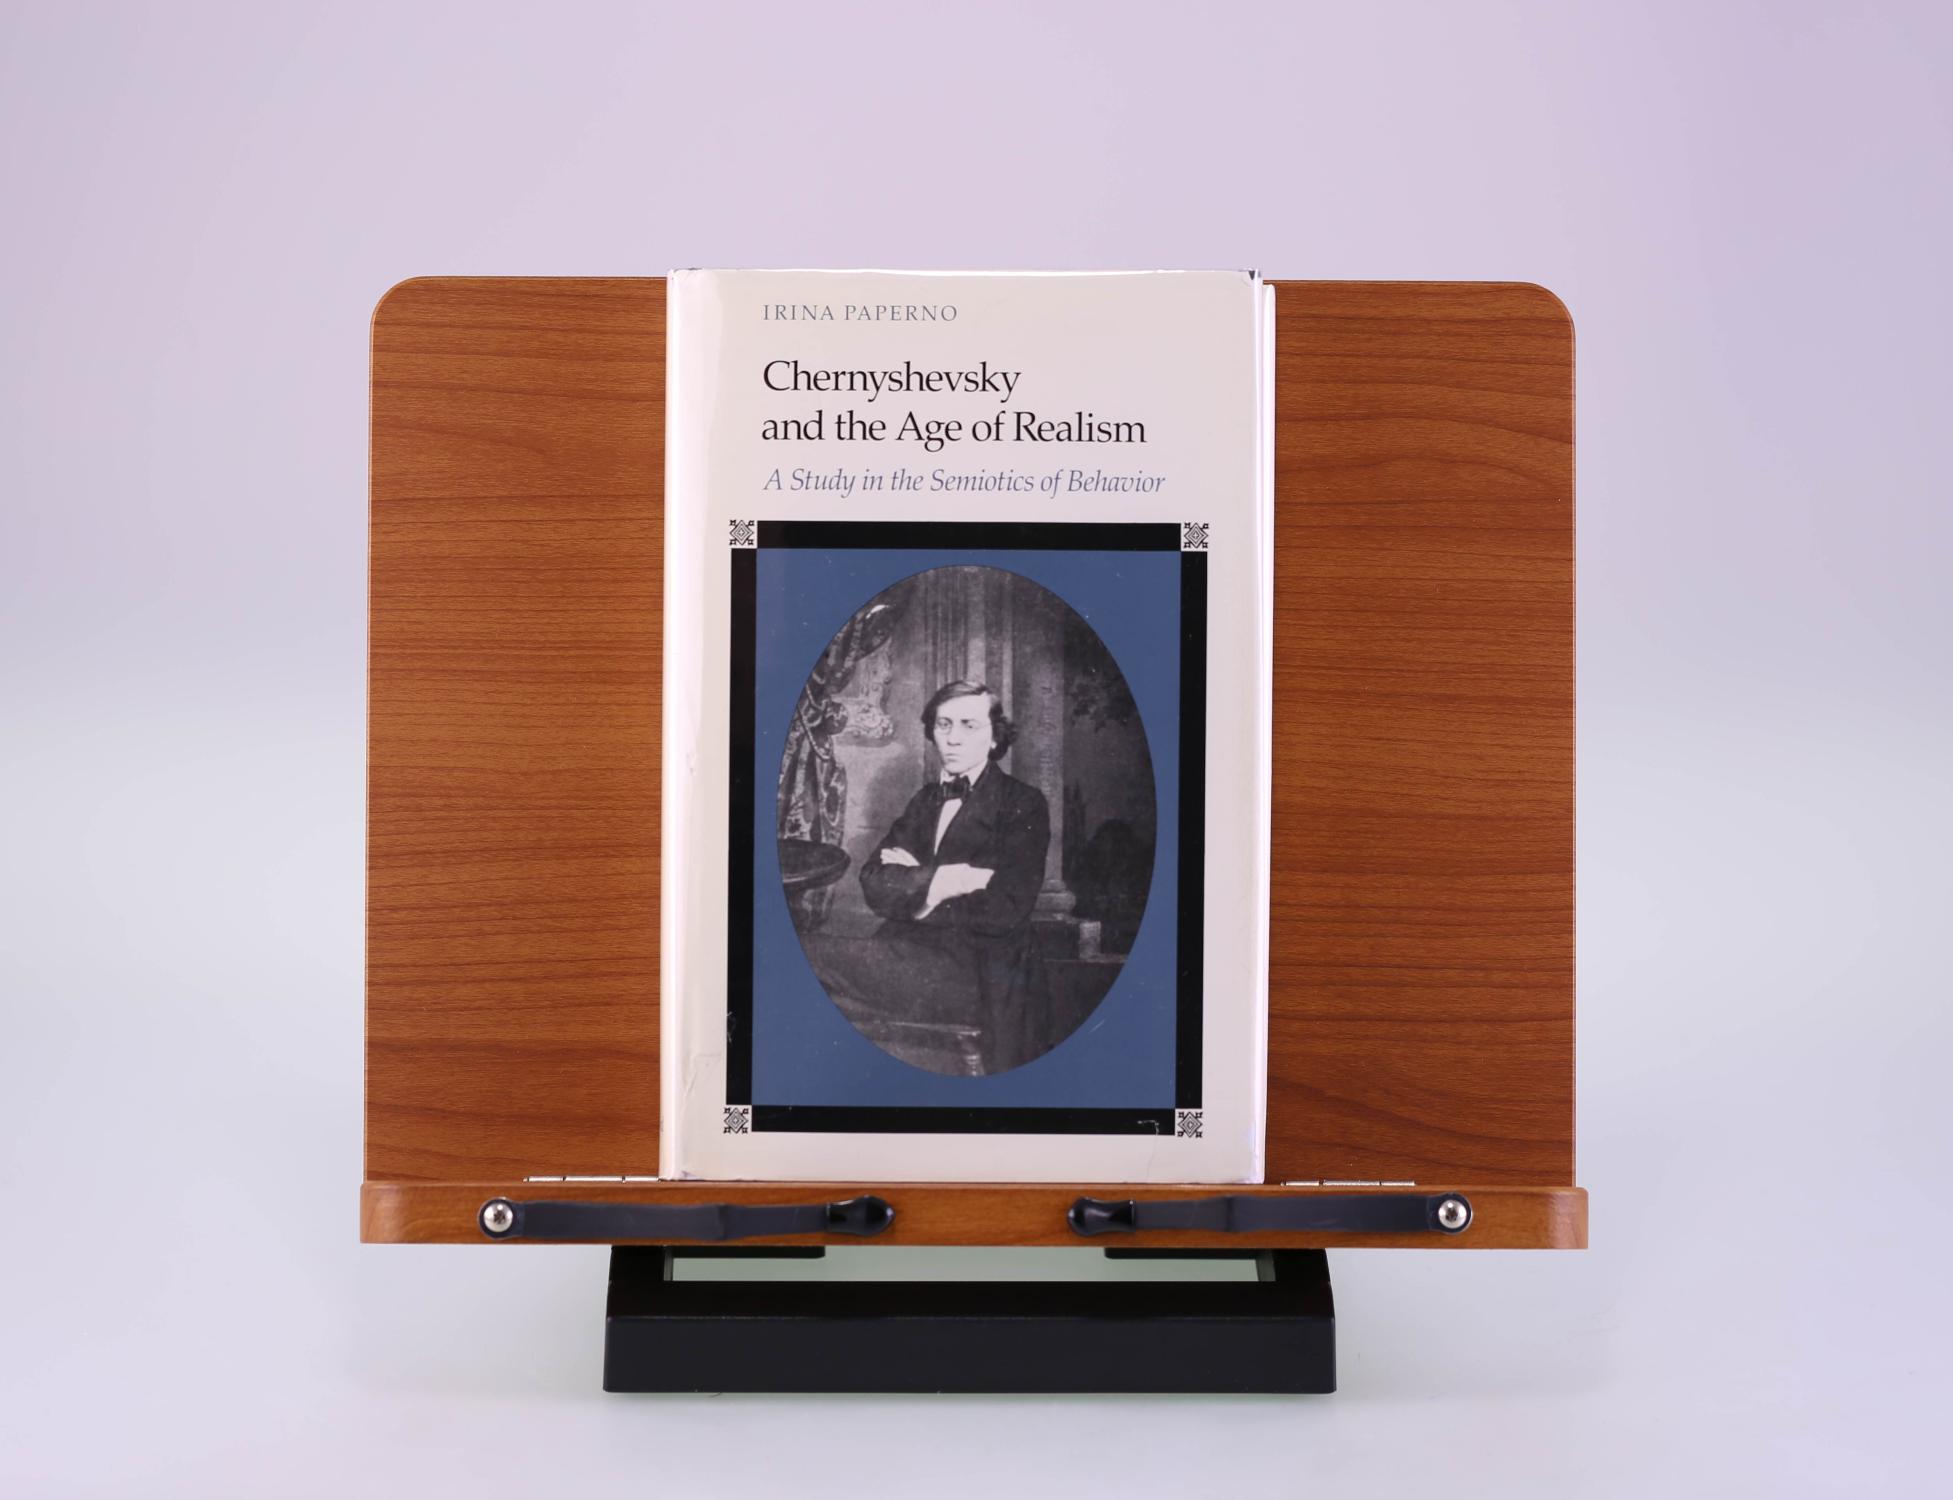 Chernyshevsky and the Age of Realism: A Study in the Semiotics of Behavior - Paperno, Irina